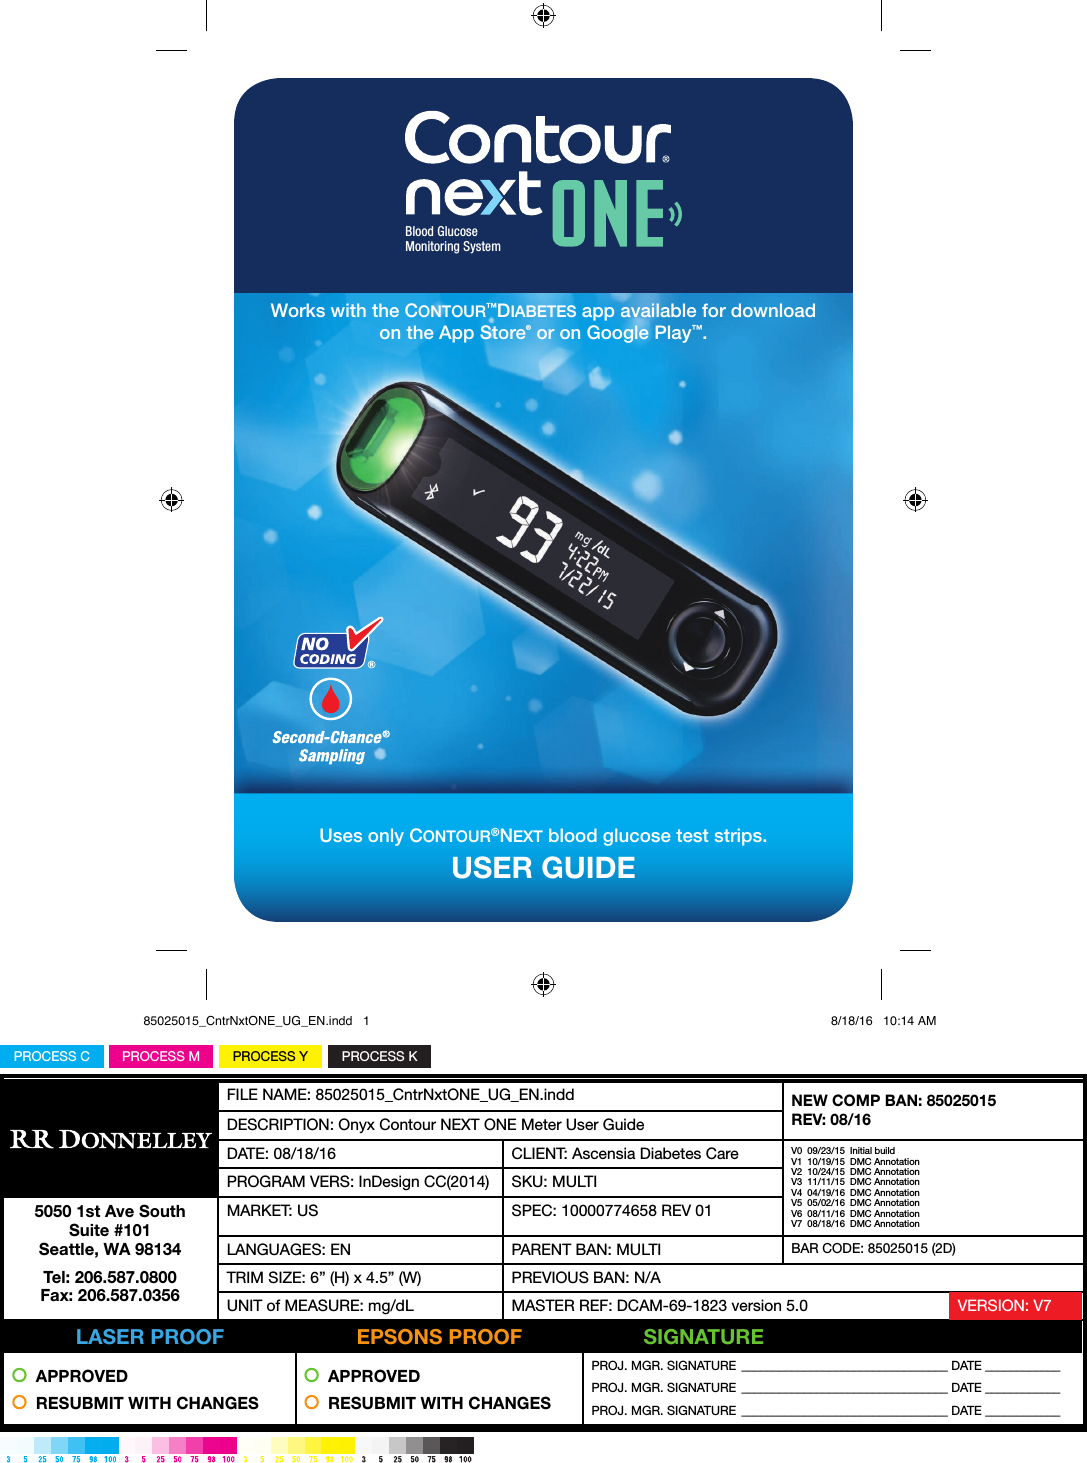 PROCESS YPROCESS MPROCESS C PROCESS KFILE NAME: 85025015_CntrNxtONE_UG_EN.indd NEW COMP BAN: 85025015REV: 08/16DESCRIPTION: Onyx Contour NEXT ONE Meter User GuideDATE: 08/18/16 CLIENT: Ascensia Diabetes Care V0  09/23/15  Initial buildV1  10/19/15  DMC AnnotationV2  10/24/15  DMC AnnotationV3  11/11/15  DMC AnnotationV4  04/19/16  DMC AnnotationV5  05/02/16  DMC AnnotationV6  08/11/16  DMC AnnotationV7  08/18/16  DMC AnnotationPROGRAM VERS: InDesign CC(2014) SKU: MULTI5050 1st Ave South Suite #101 Seattle, WA 98134Tel: 206.587.0800 Fax: 206.587.0356MARKET: US SPEC: 10000774658 REV 01LANGUAGES: EN PARENT BAN: MULTI BAR CODE: 85025015 (2D)TRIM SIZE: 6” (H) x 4.5” (W) PREVIOUS BAN: N/AUNIT of MEASURE: mg/dL MASTER REF: DCAM-69-1823 version 5.0           LASER PROOF          EPSONS PROOF          SIGNATURE  APPROVED  RESUBMIT WITH CHANGES  APPROVED  RESUBMIT WITH CHANGESPROJ. MGR. SIGNATURE  _________________________________ DATE ____________PROJ. MGR. SIGNATURE  _________________________________ DATE ____________PROJ. MGR. SIGNATURE  _________________________________ DATE ____________VERSION: V7USER GUIDEUses only CONTOUR®NEXT blood glucose test strips.Blood GlucoseMonitoring System Works with the CONTOUR™DIABETES app available for download on the App Store® or on Google Play™.85025015_CntrNxtONE_UG_EN.indd   1 8/18/16   10:14 AM